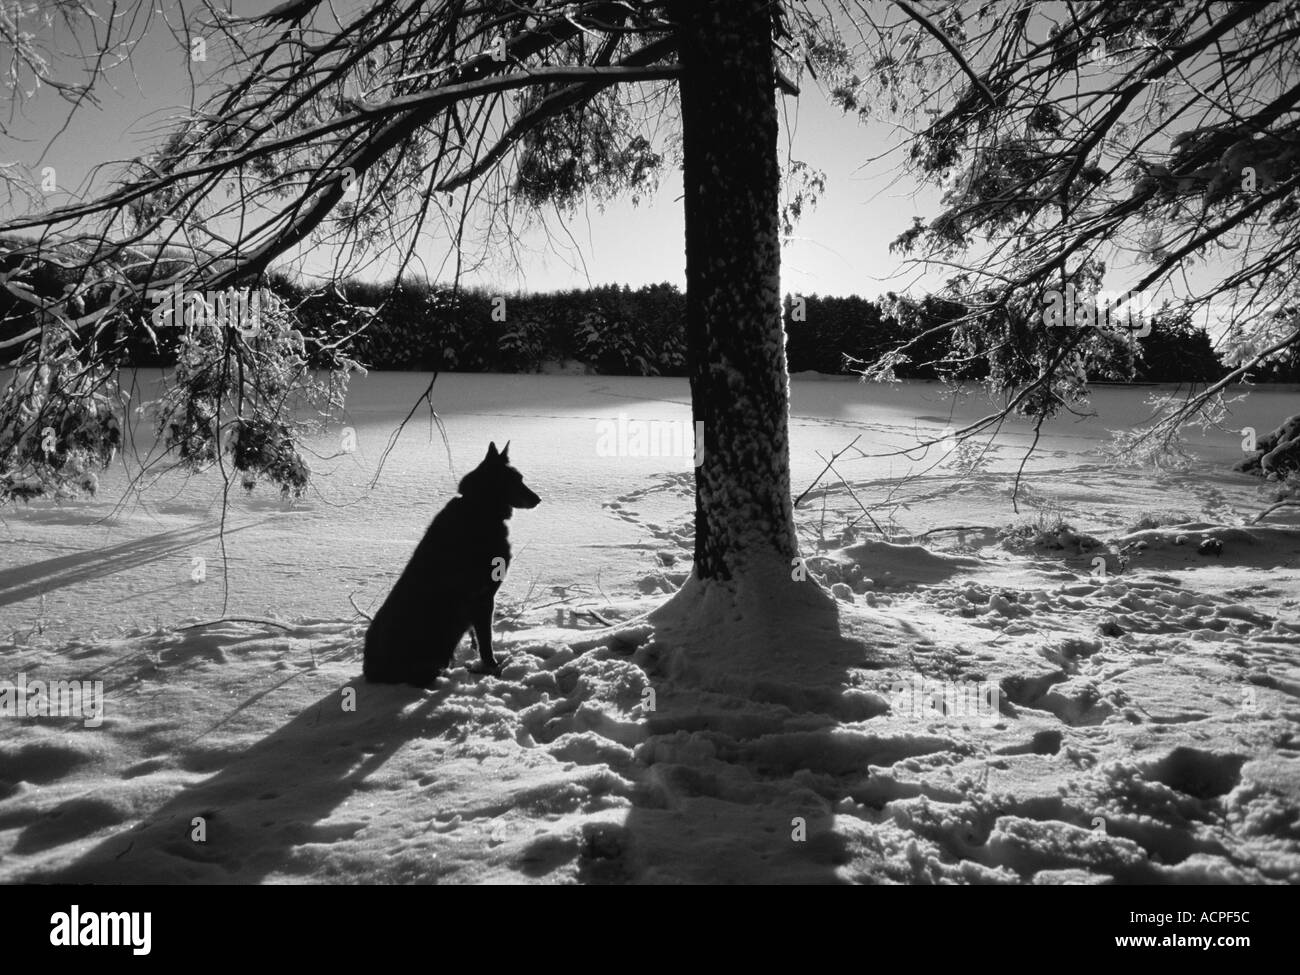 dog near a frozen lake under a tree looking out alone hunting shepherd mutt mix Stock Photo